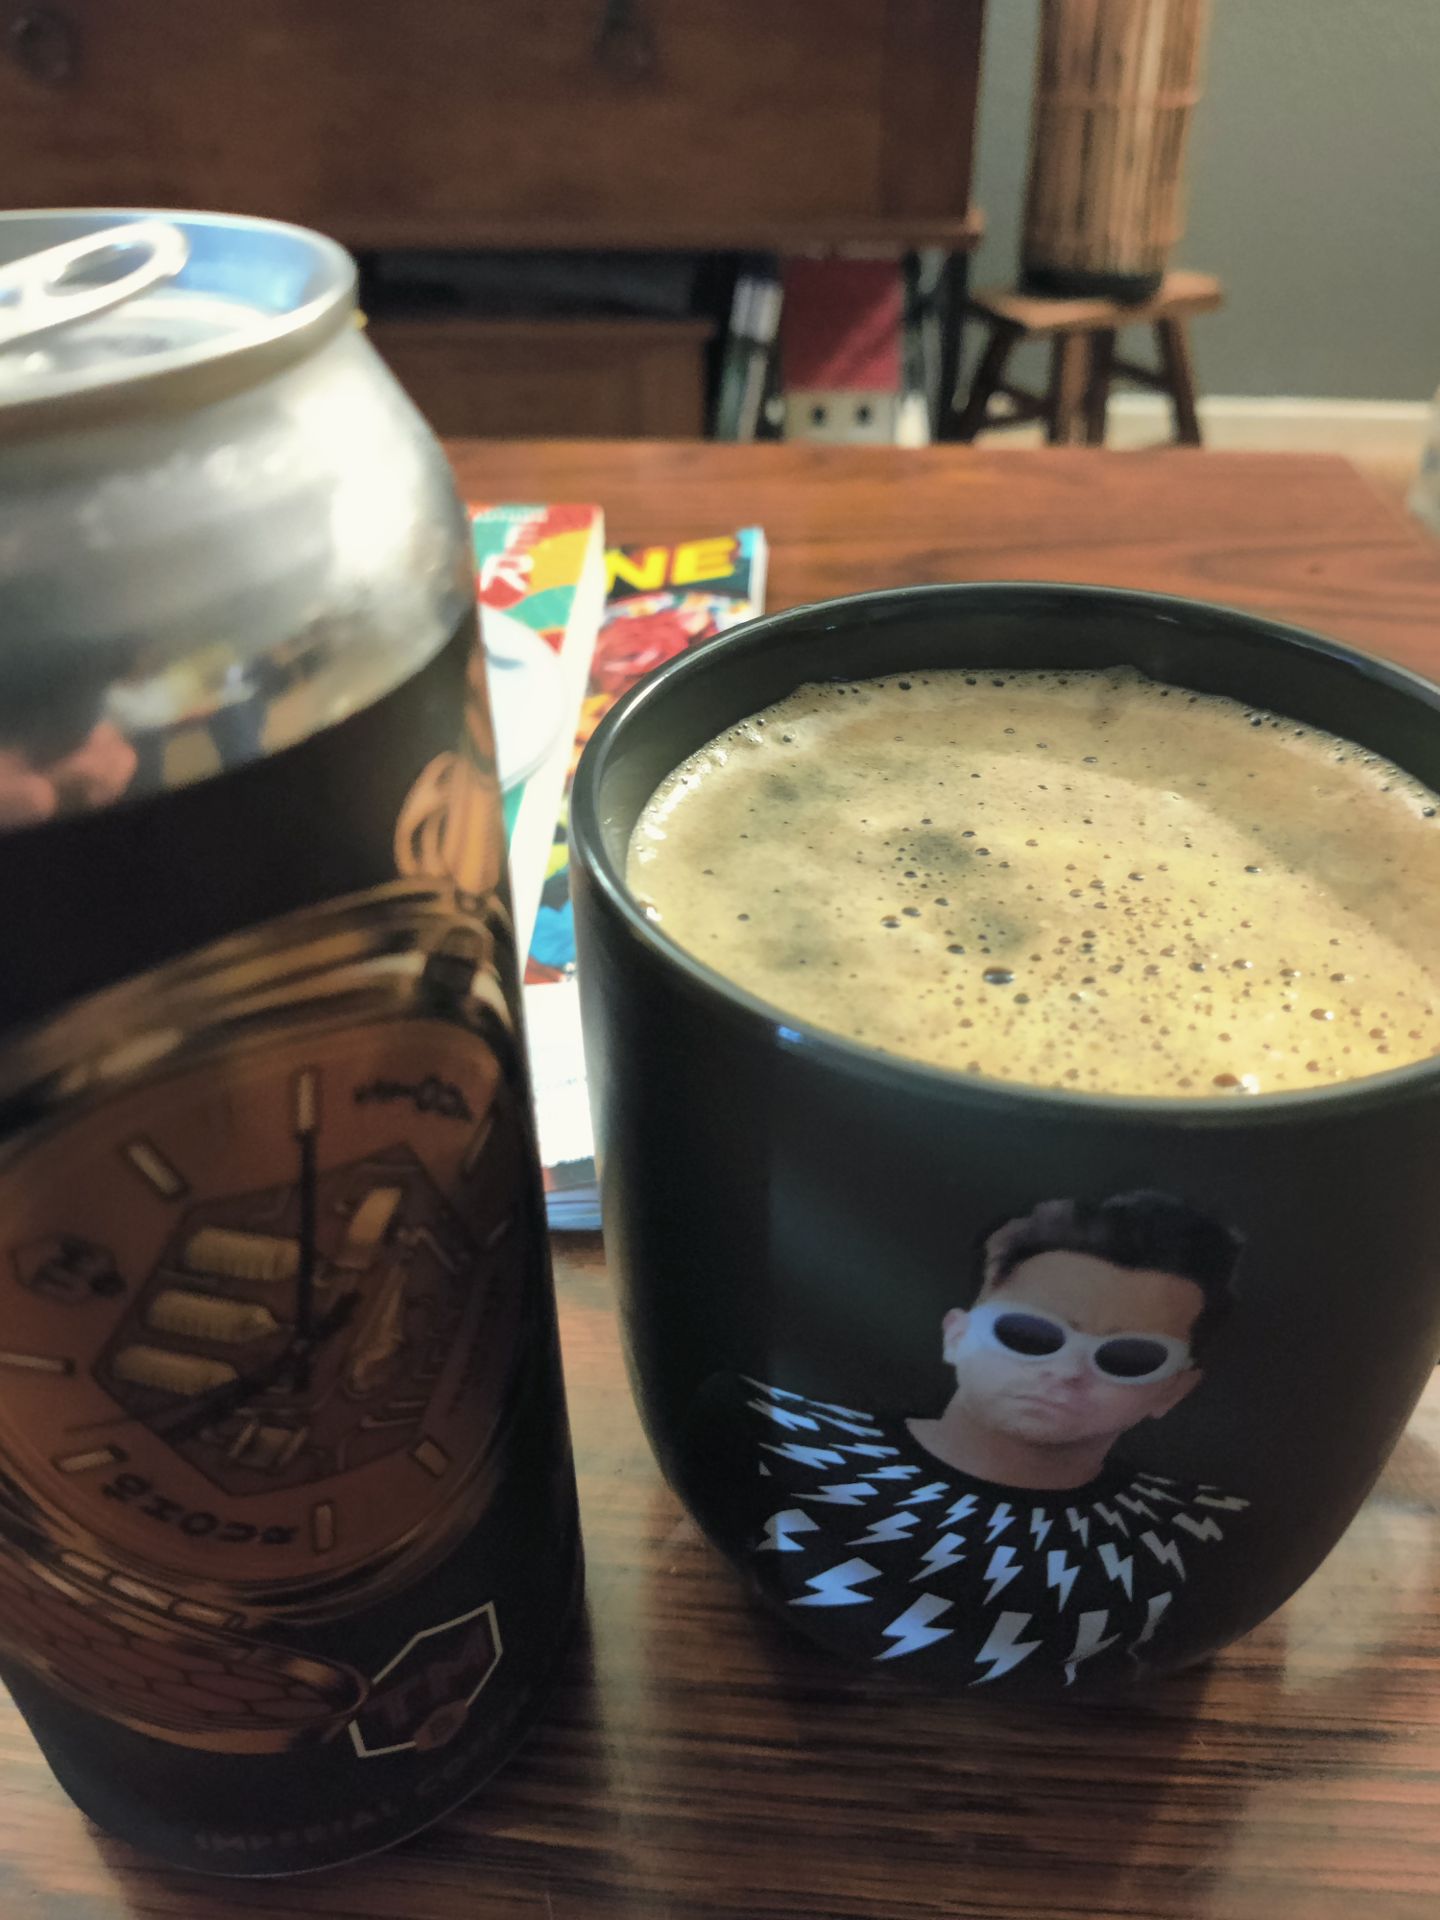 10 Hour Coffee Stout in a Coffee mug from Long Beach Brewing